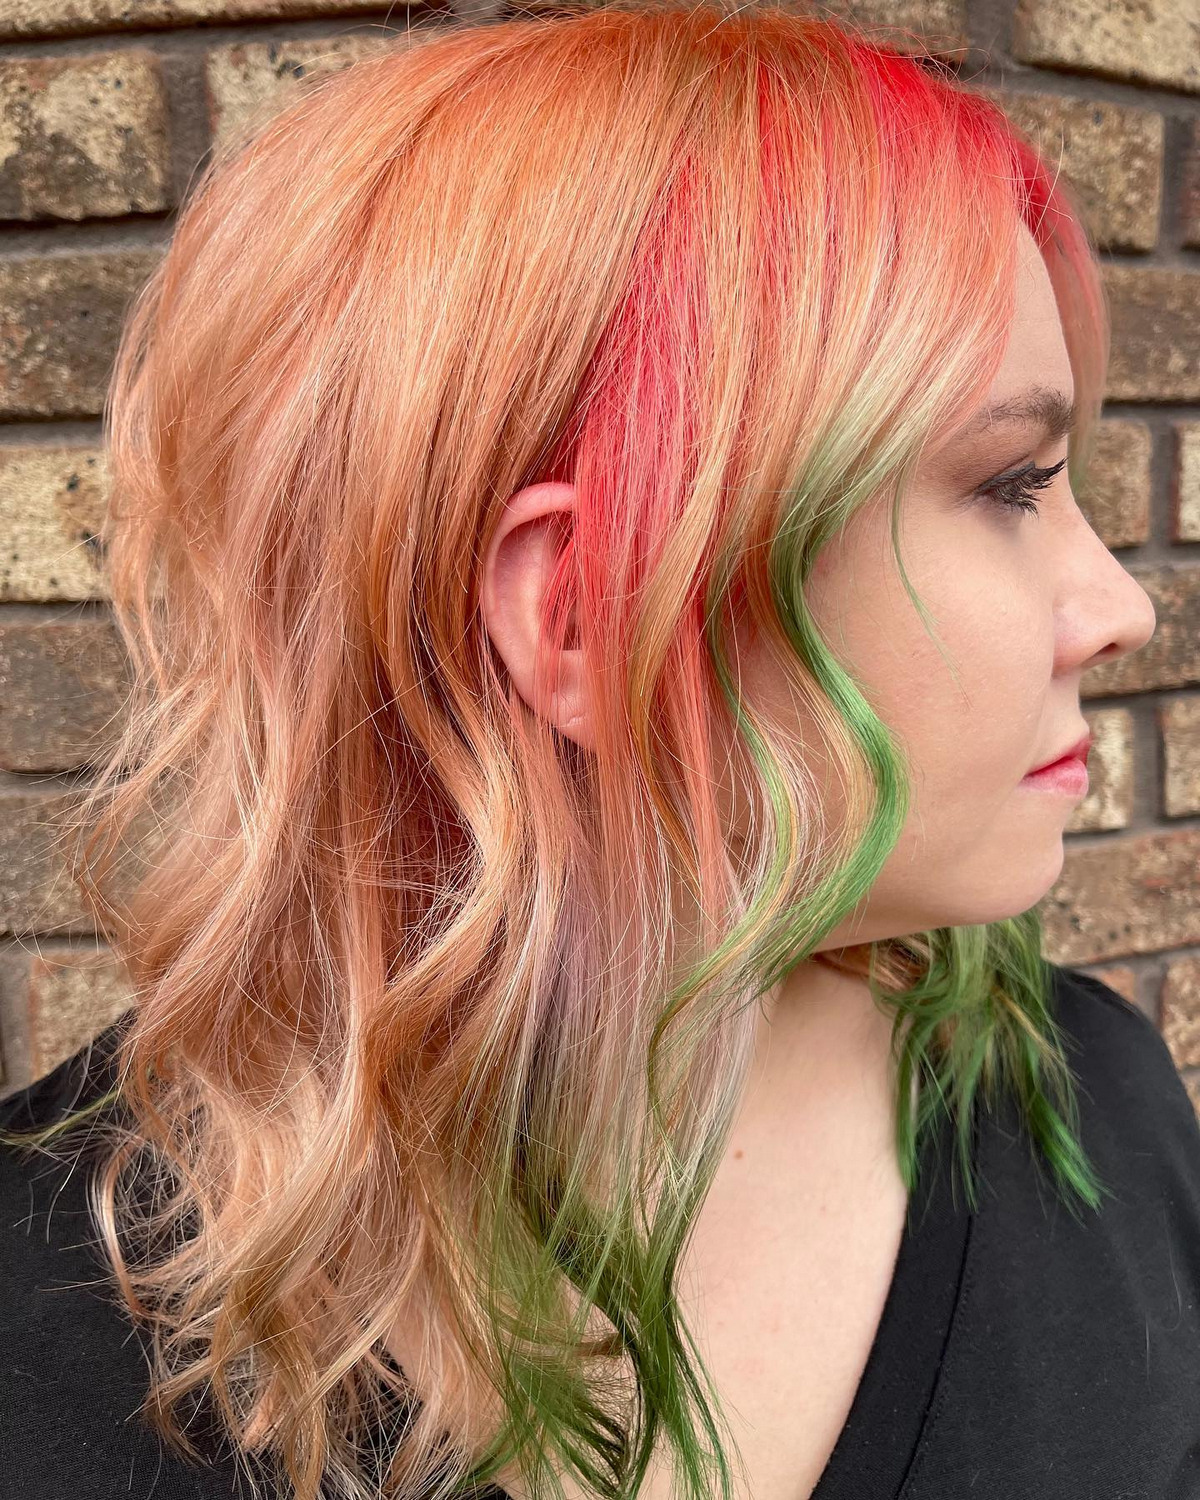 Blonde Hair With Red And Green Highlights